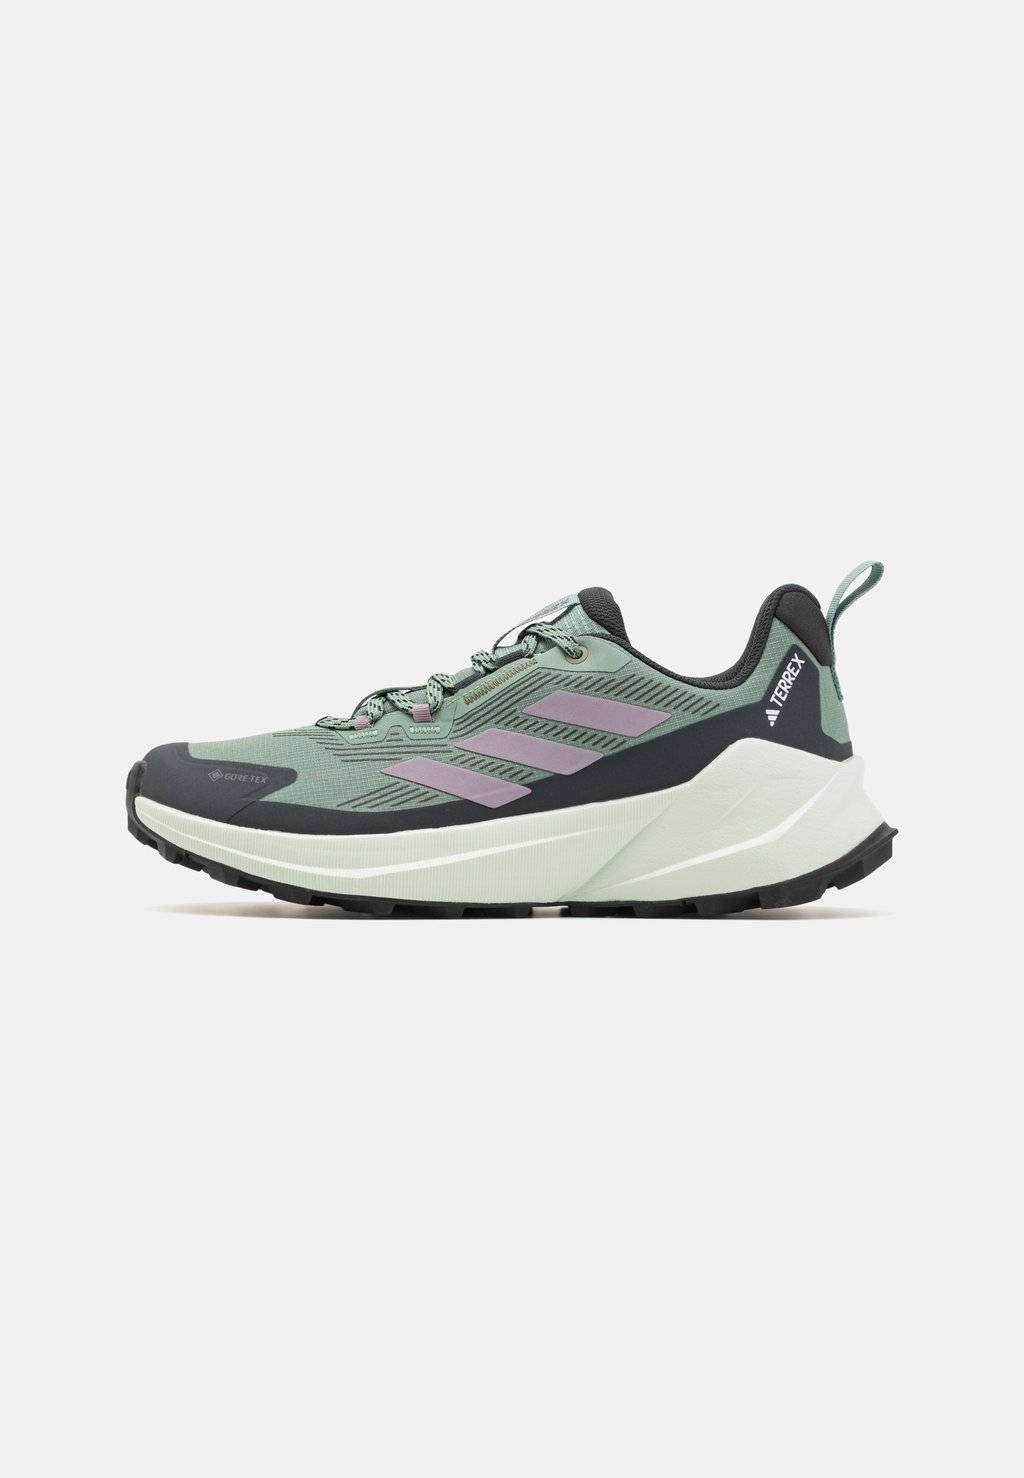 Кроссовки TRAILMAKER 2 GORE-TEX SHOES Adidas Terrex, цвет silver green/preloved fig/crystal jade of natural jade temperament cold wind gold plated necklace 925 silver inlaid green pine fan hetian jade pendant